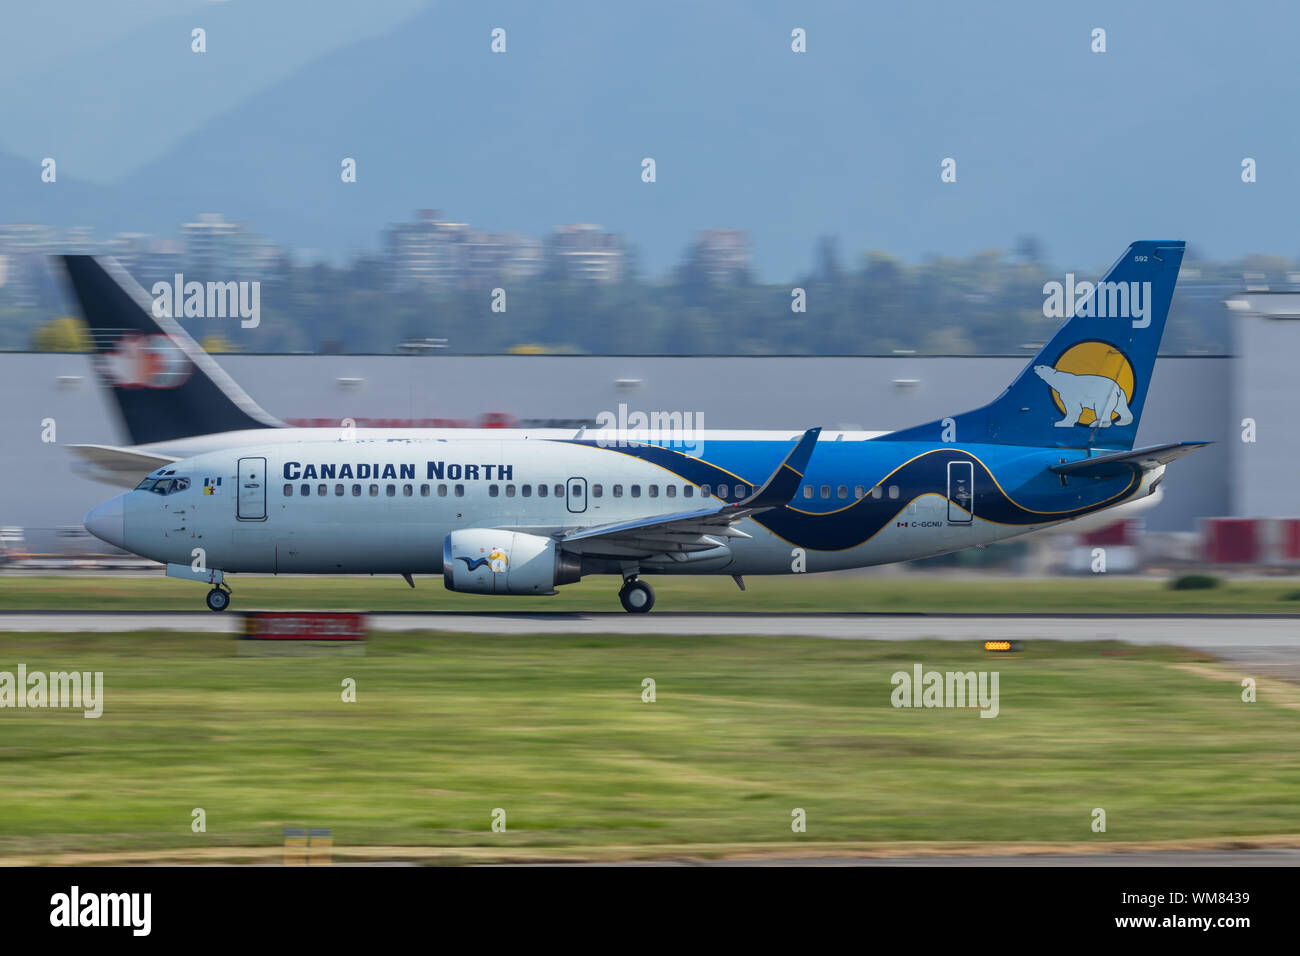 Canadian North (Airlines) Boeing 737 taking off from Vancouver Intl. Airport on a sunny day. Stock Photo